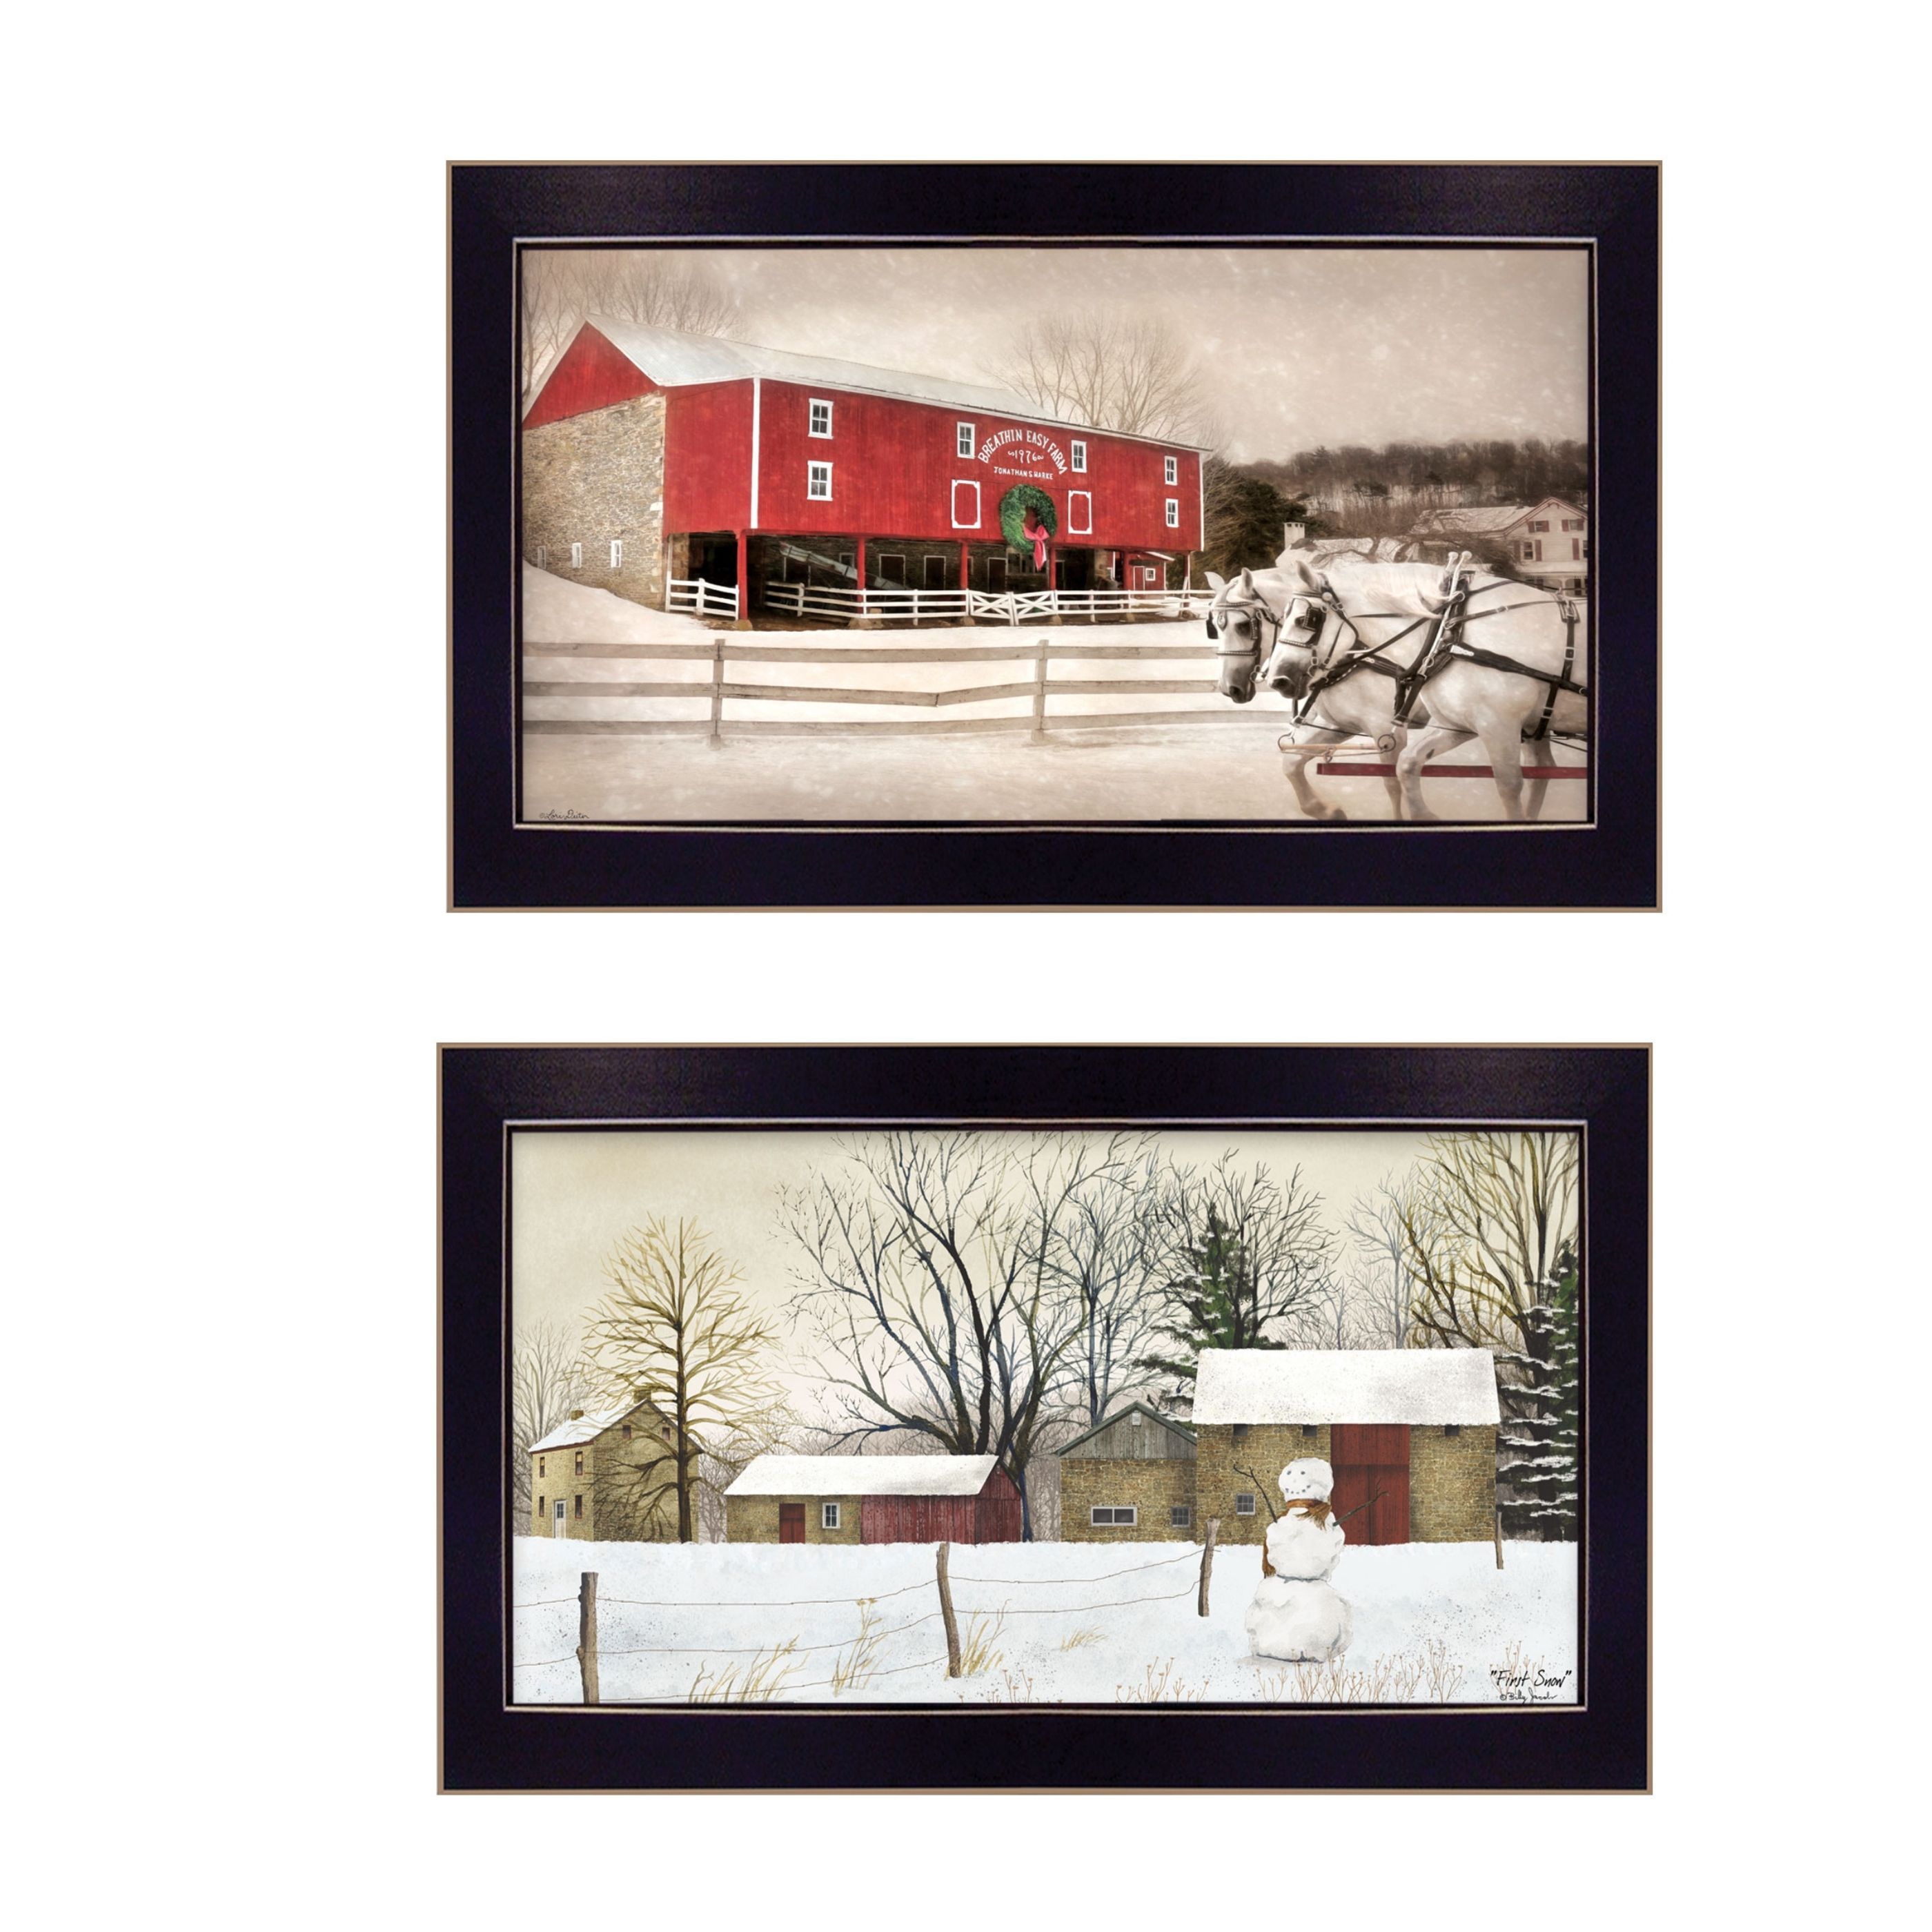 "Winter Scenic Barns Collection" 2-Piece Vignette By L. Deiter and B. Jacobs, Printed Wall Art, Ready To Hang Framed Poster, Black Frame